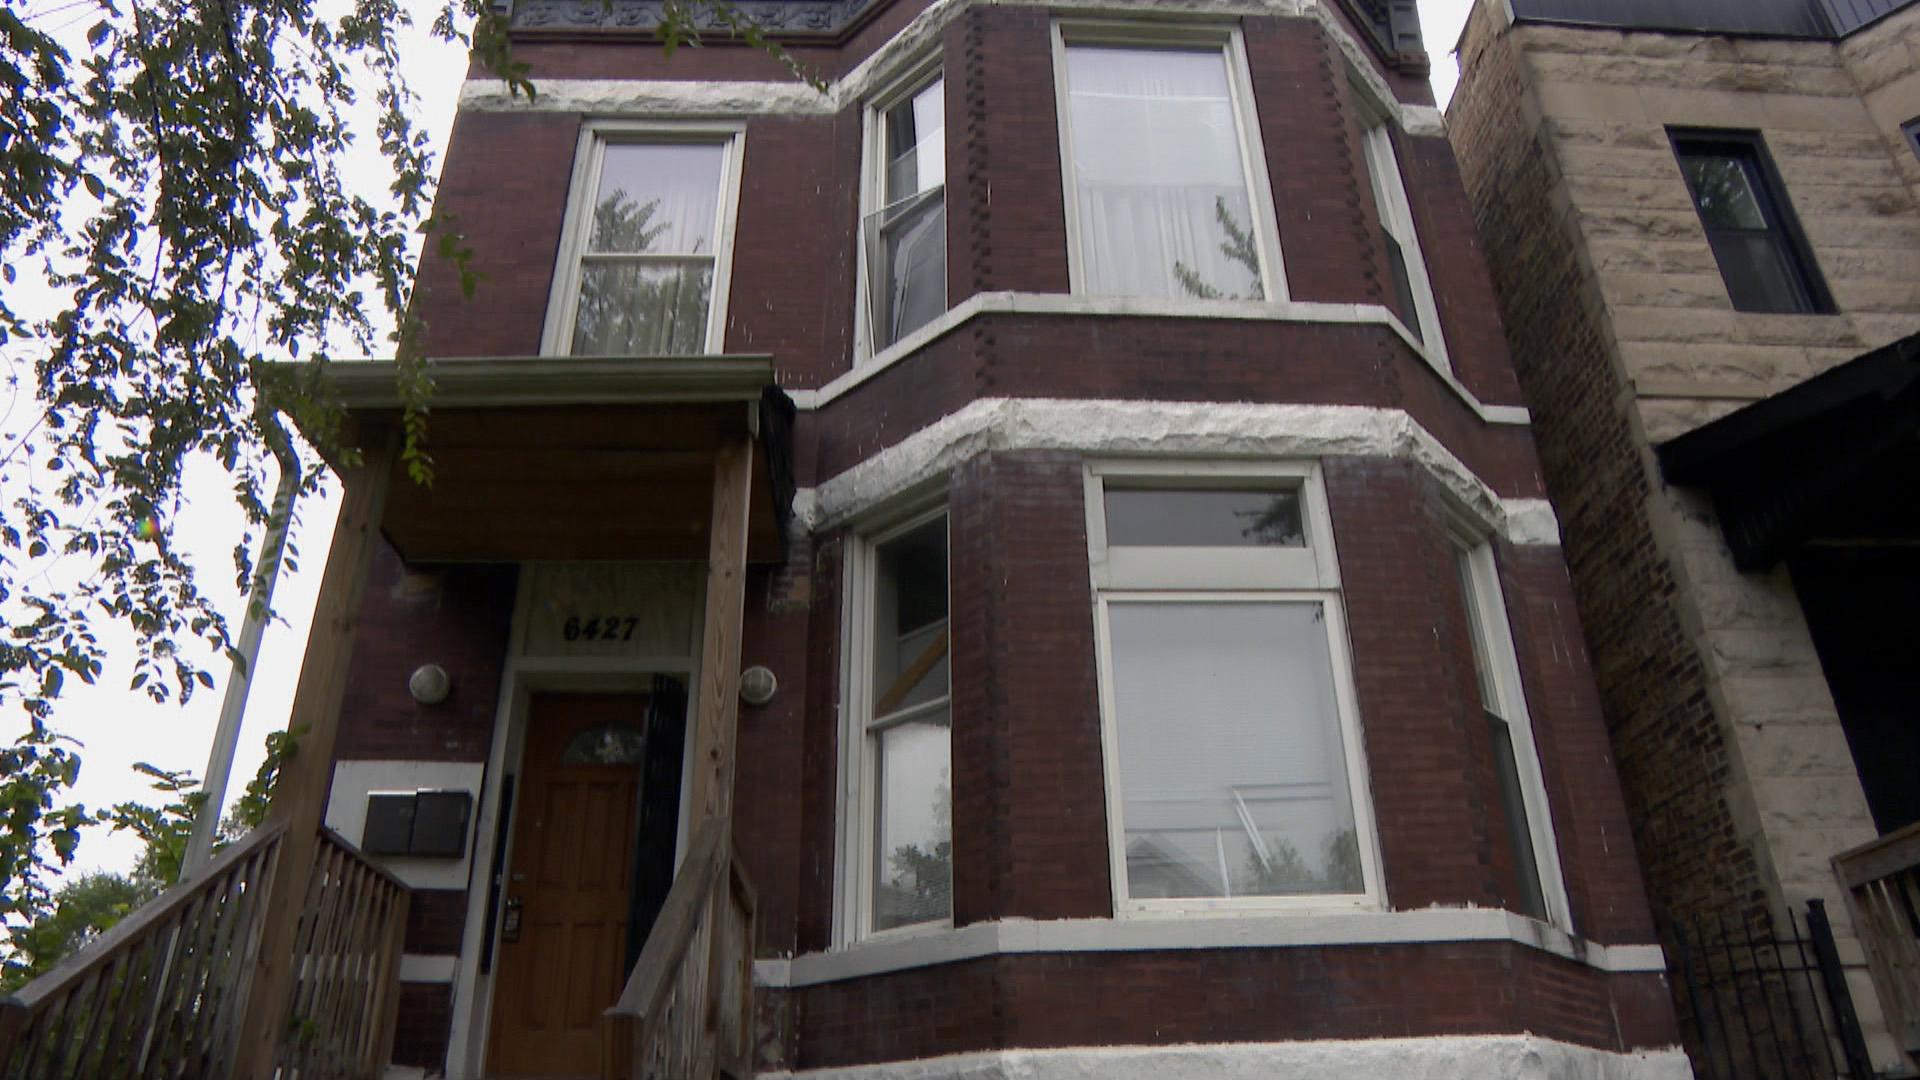 The former home of Emmett Till and his mother, Mamie Till-Mobley. (WTTW News)